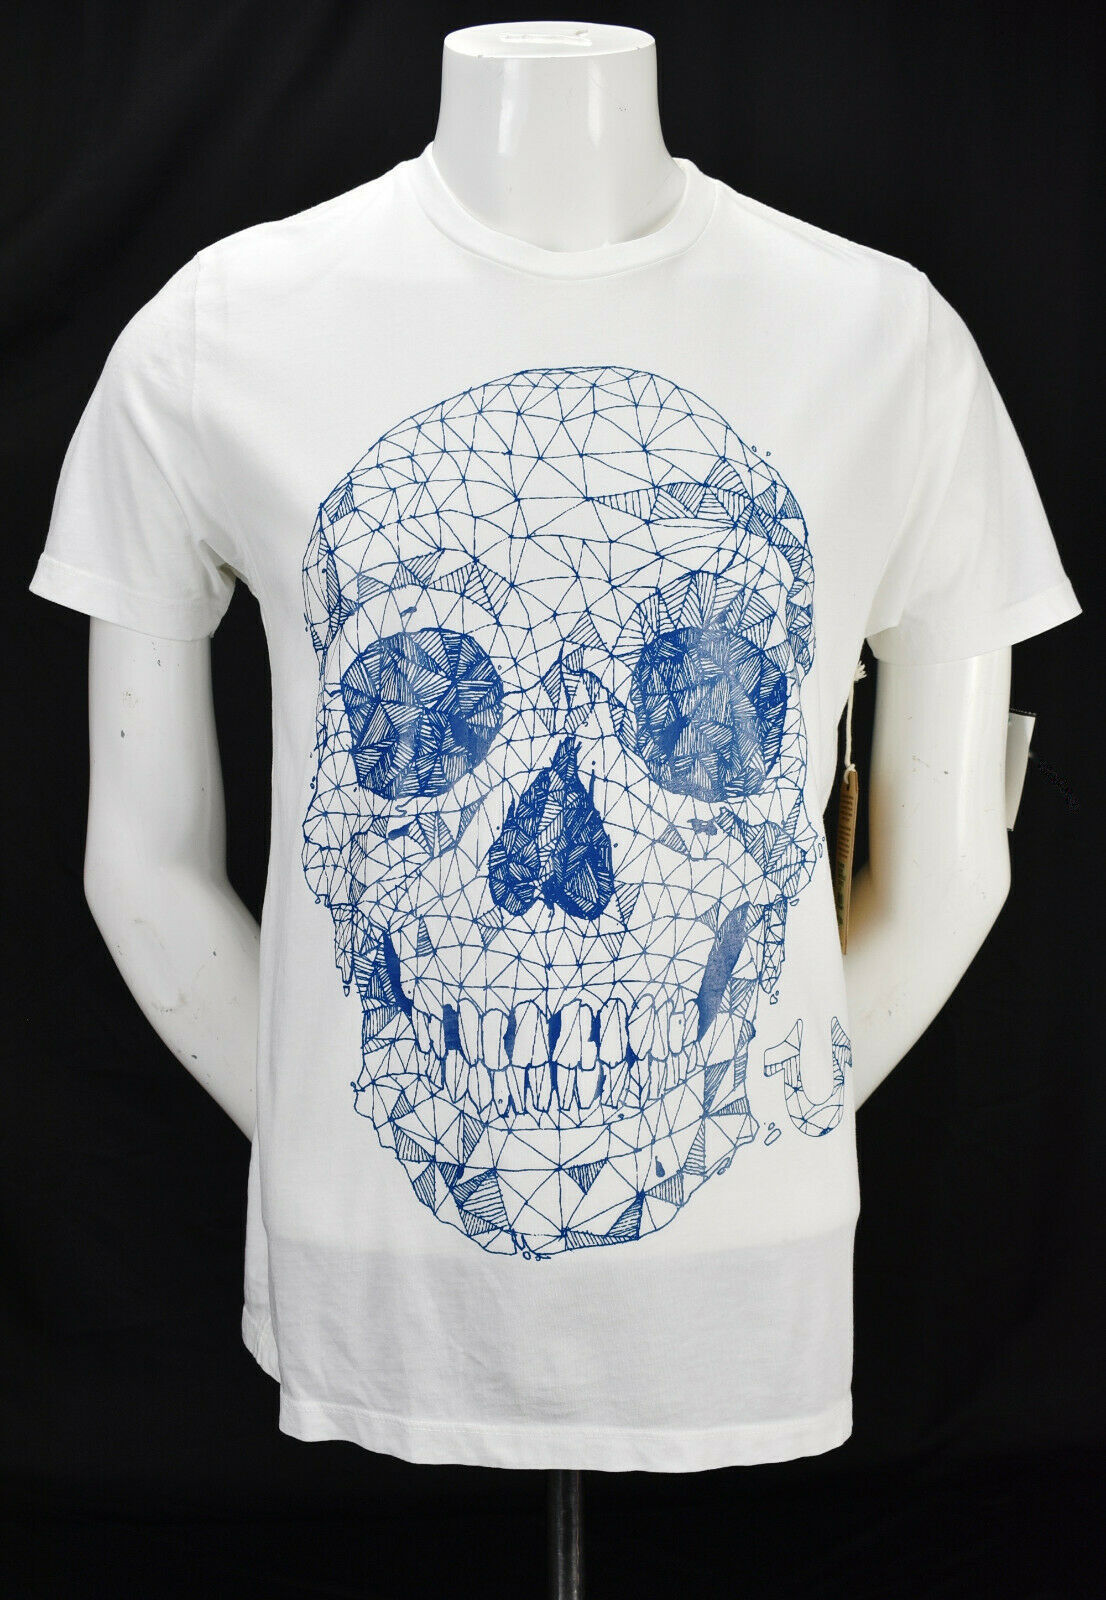 Primary image for True Religion Fragment Skull Graphic Print Tee T Shirt M